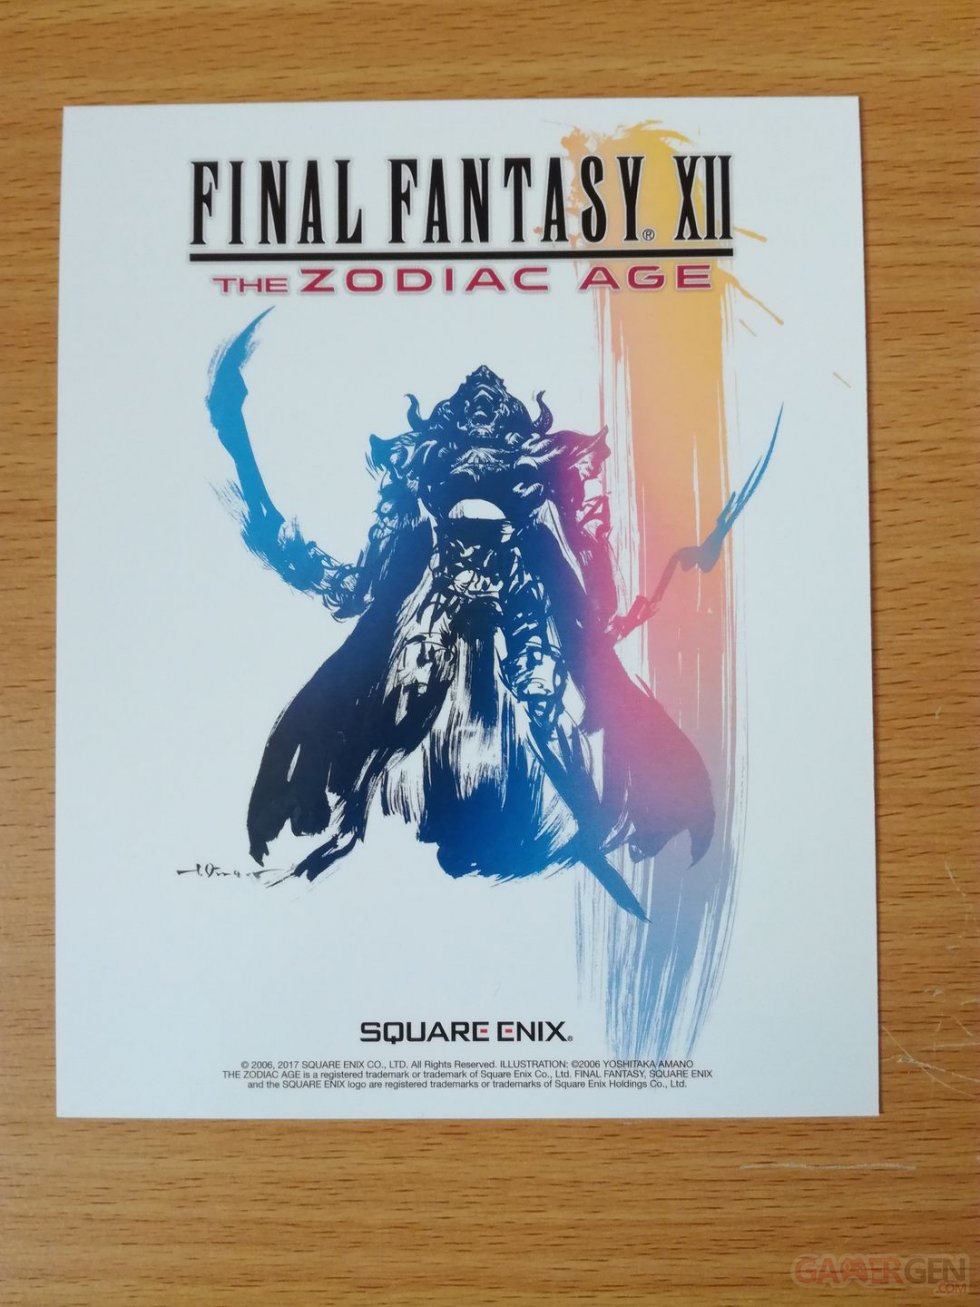 Final-Fantasy-XII-FFXII-The-Zodiac-Age-collector-unboxing-déballage-22-16-07-2017